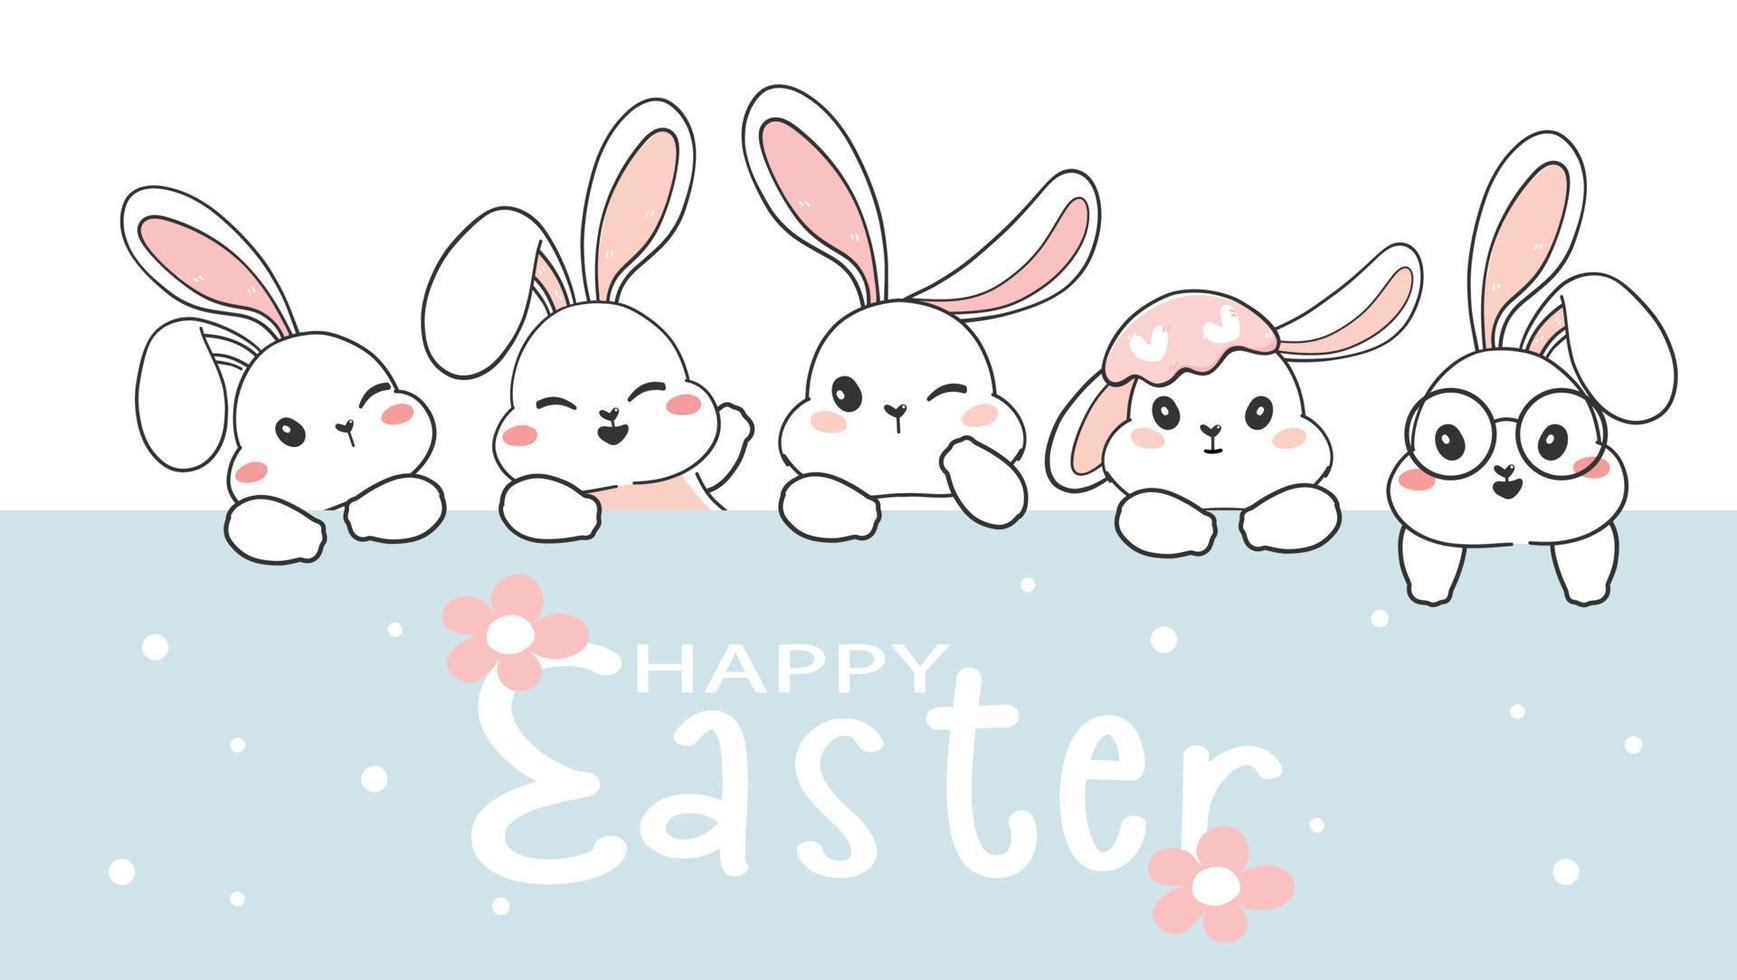 cute Happy Easter greeting card, group of white bunny heads, cute rabbit character set, cartoon wildlife animal holiday drawing vector